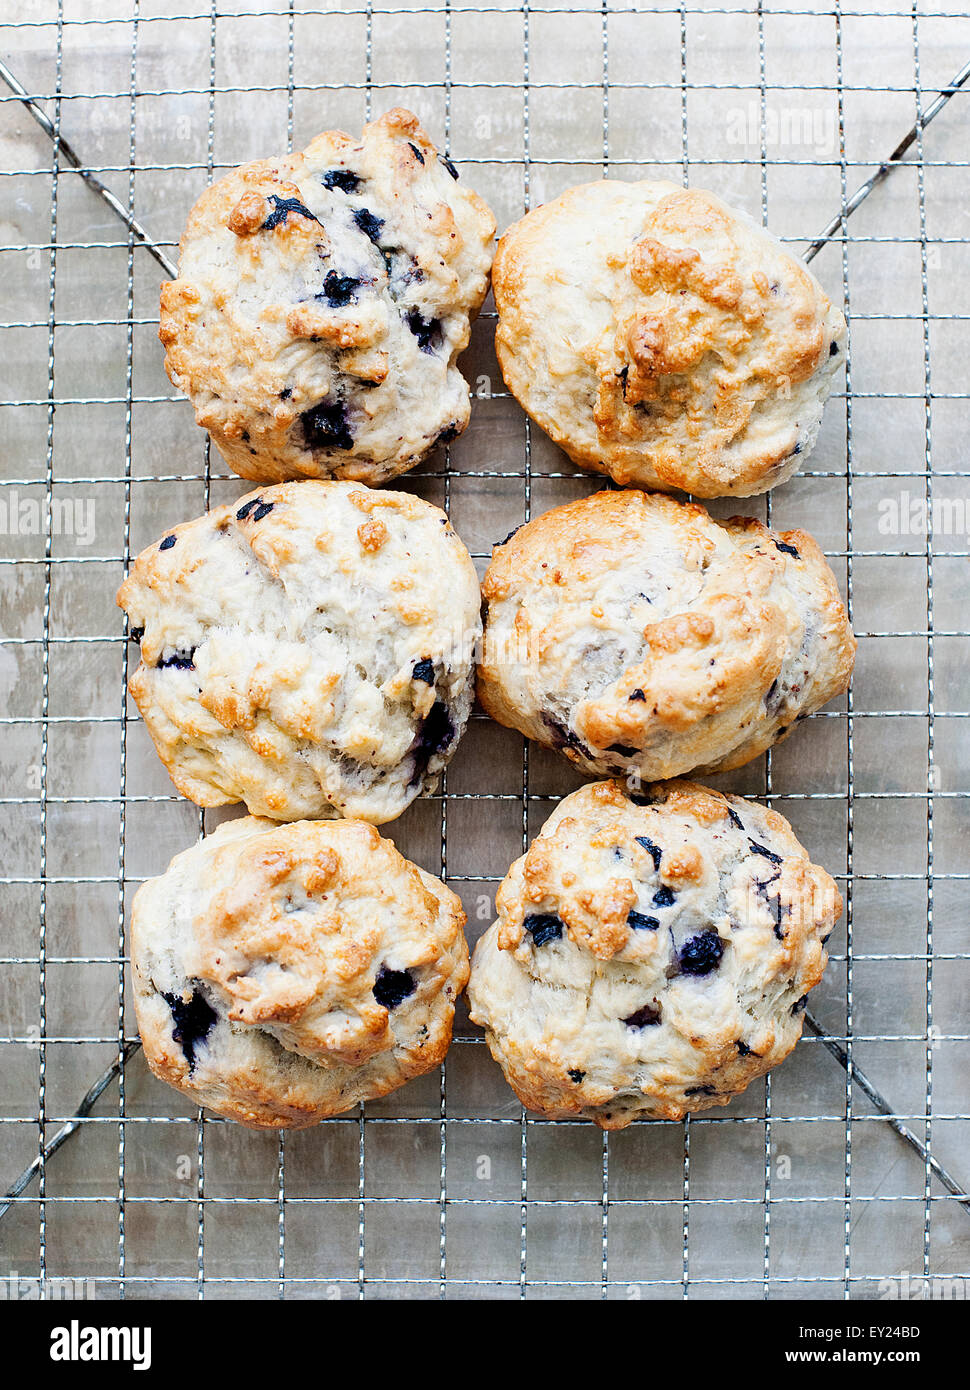 Still life of blueberry scones on cooling rack Stock Photo